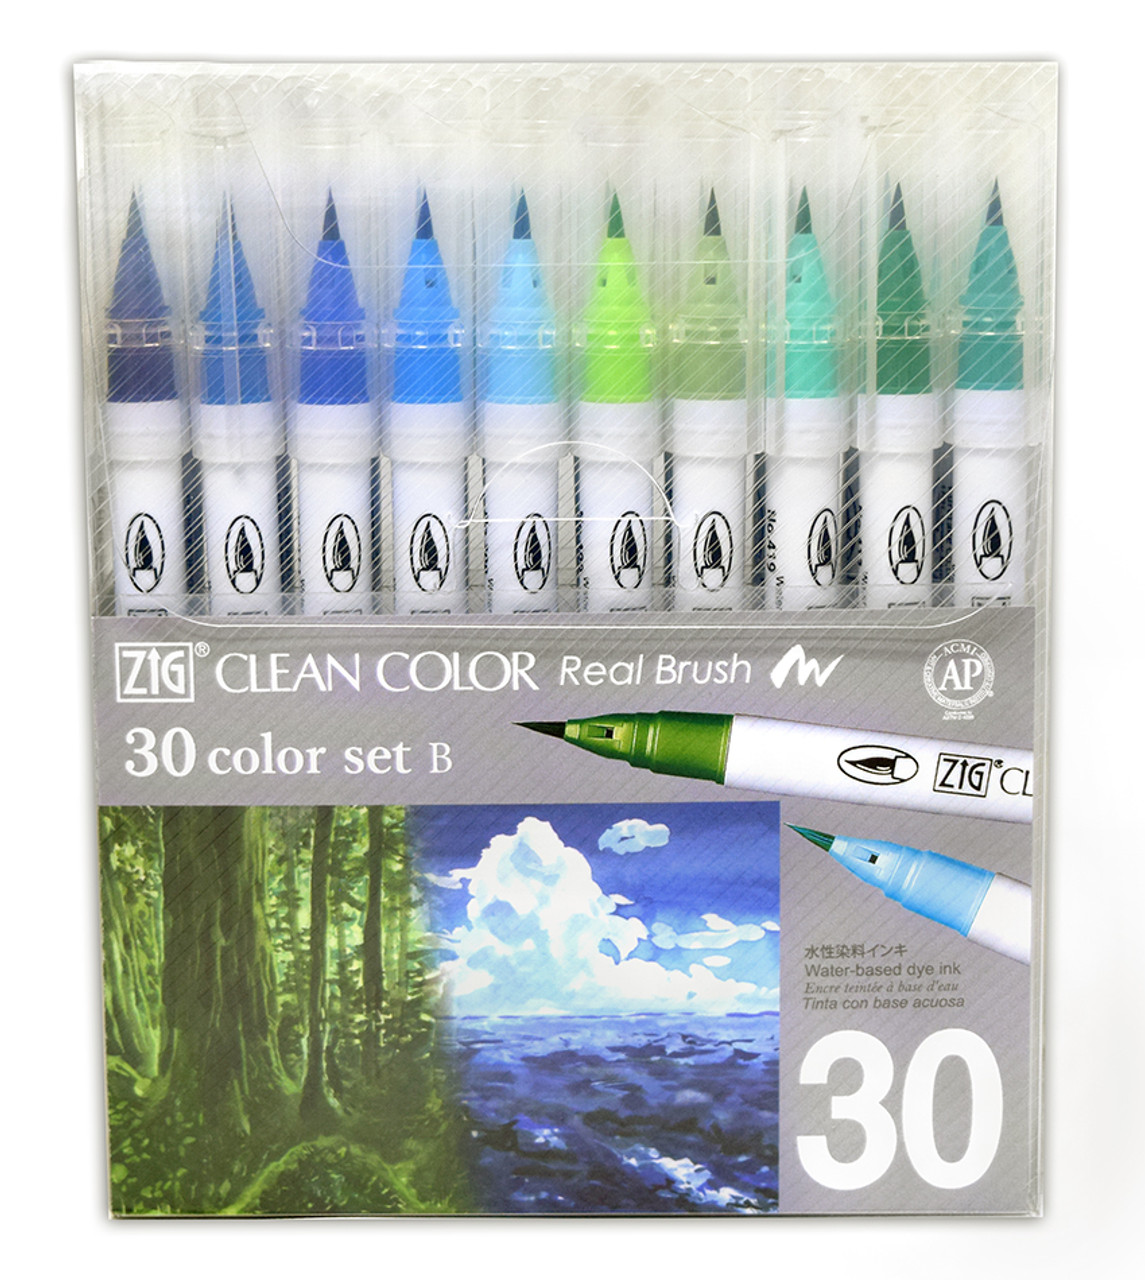 Zig Clean Color Real Brush SET B - 30 Cool Colors